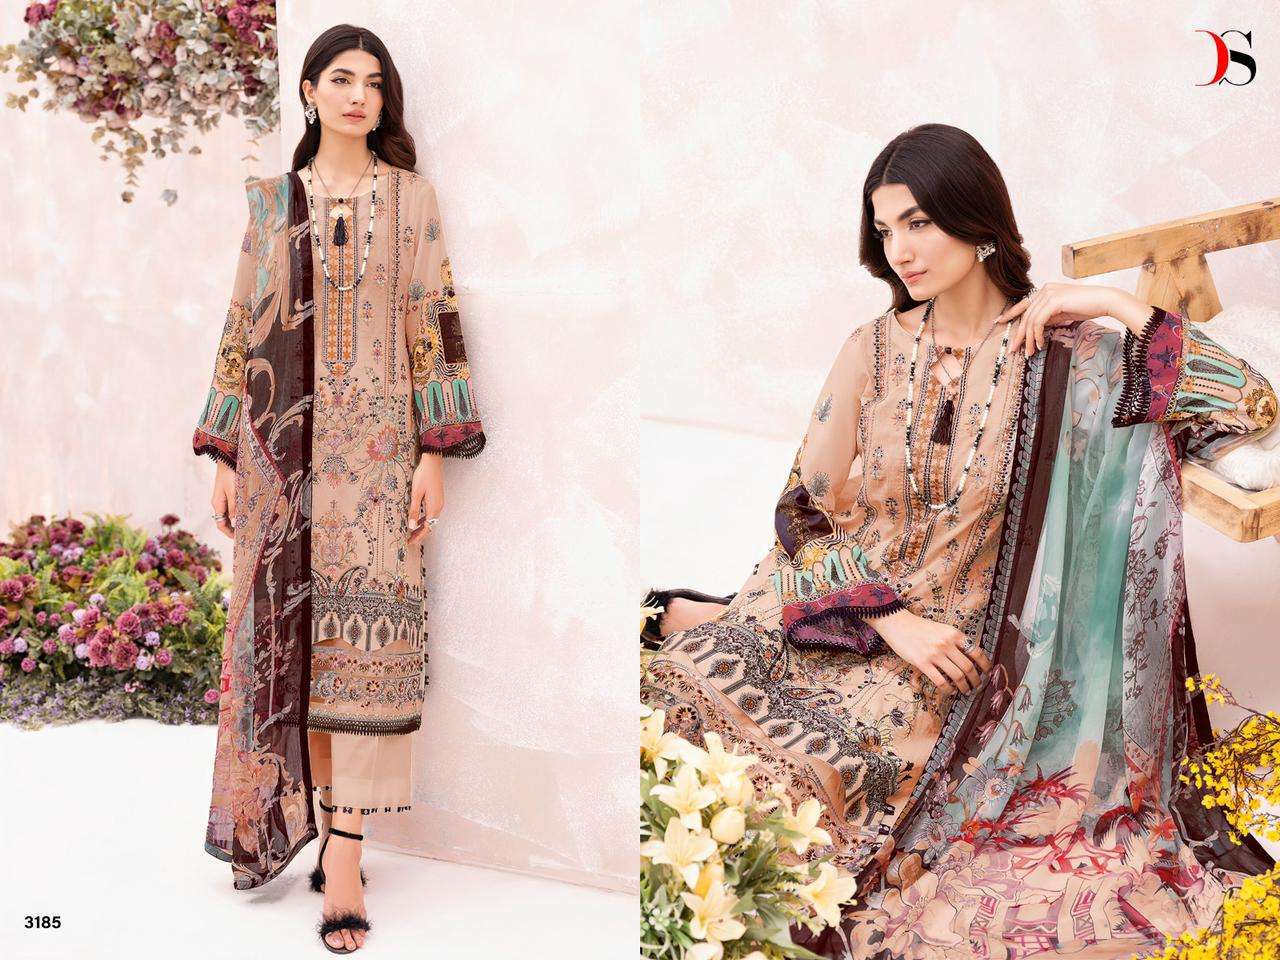 Cheveron Vol-8 By Deepsy Suits 3181 To 3186 Series Beautiful Pakistani Suits Stylish Fancy Colorful Party Wear & Occasional Wear Pure Cotton With Embroidery Dresses At Wholesale Price